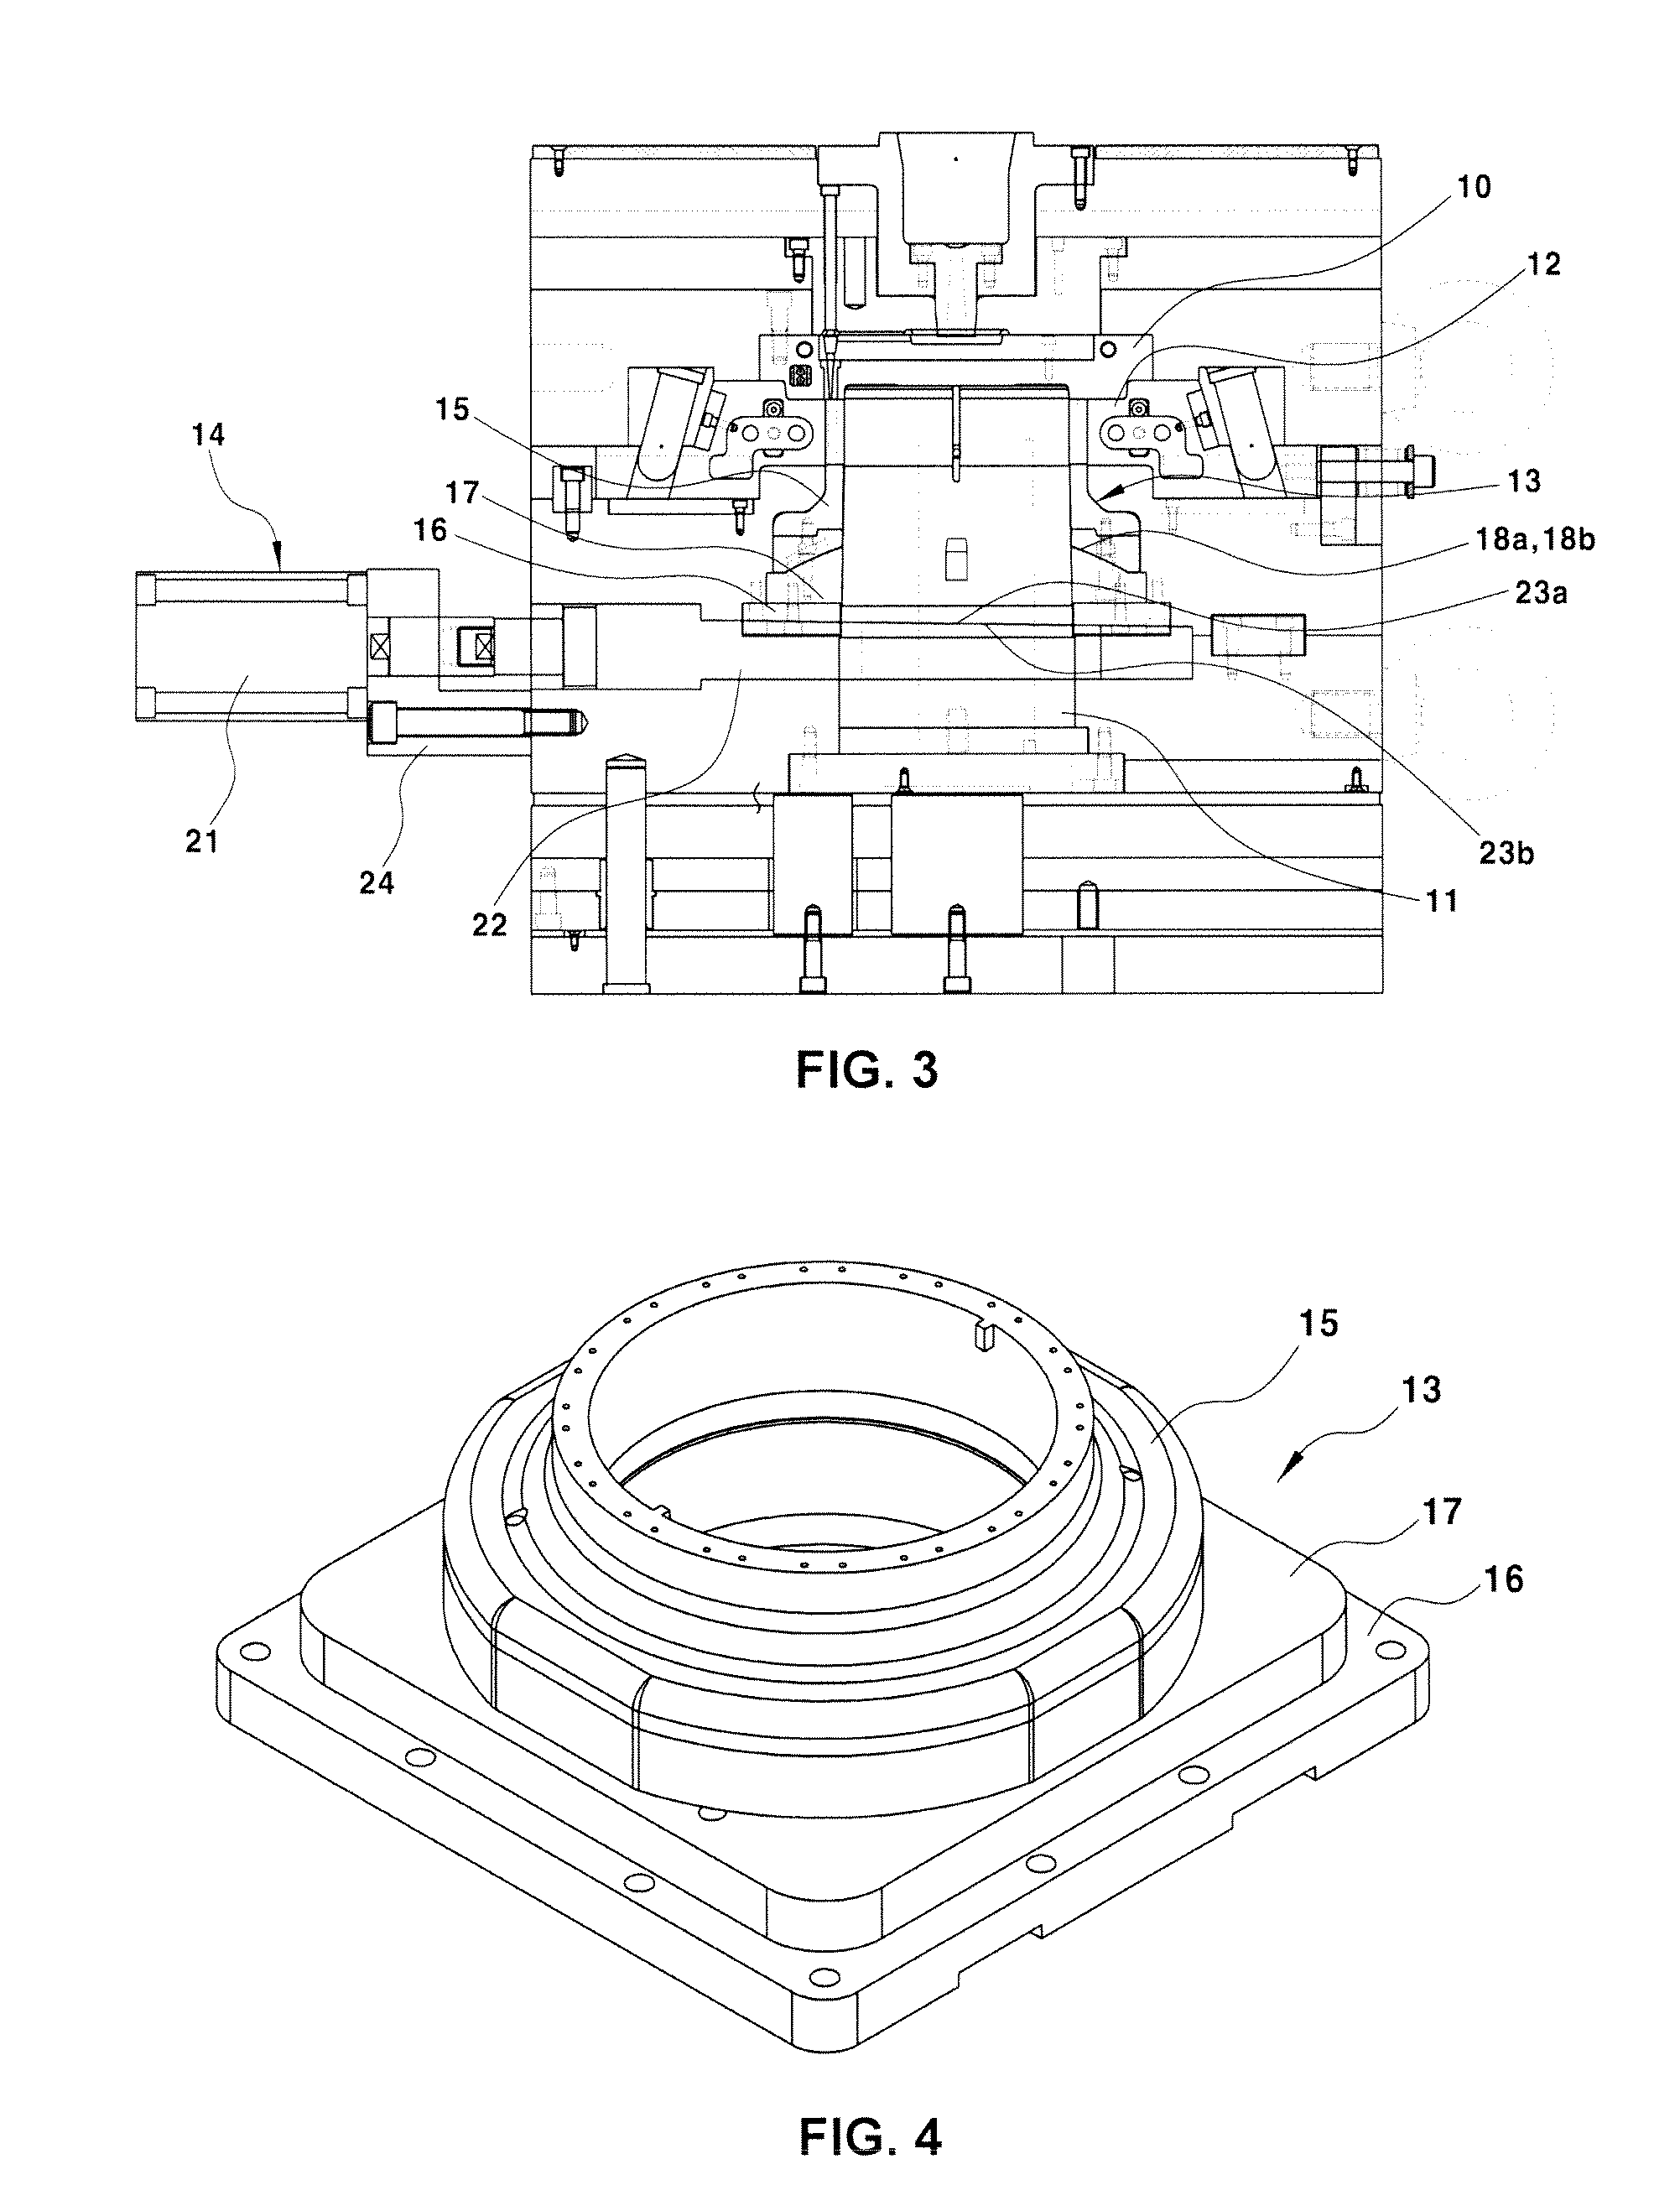 Molding apparatus for rotor of motor